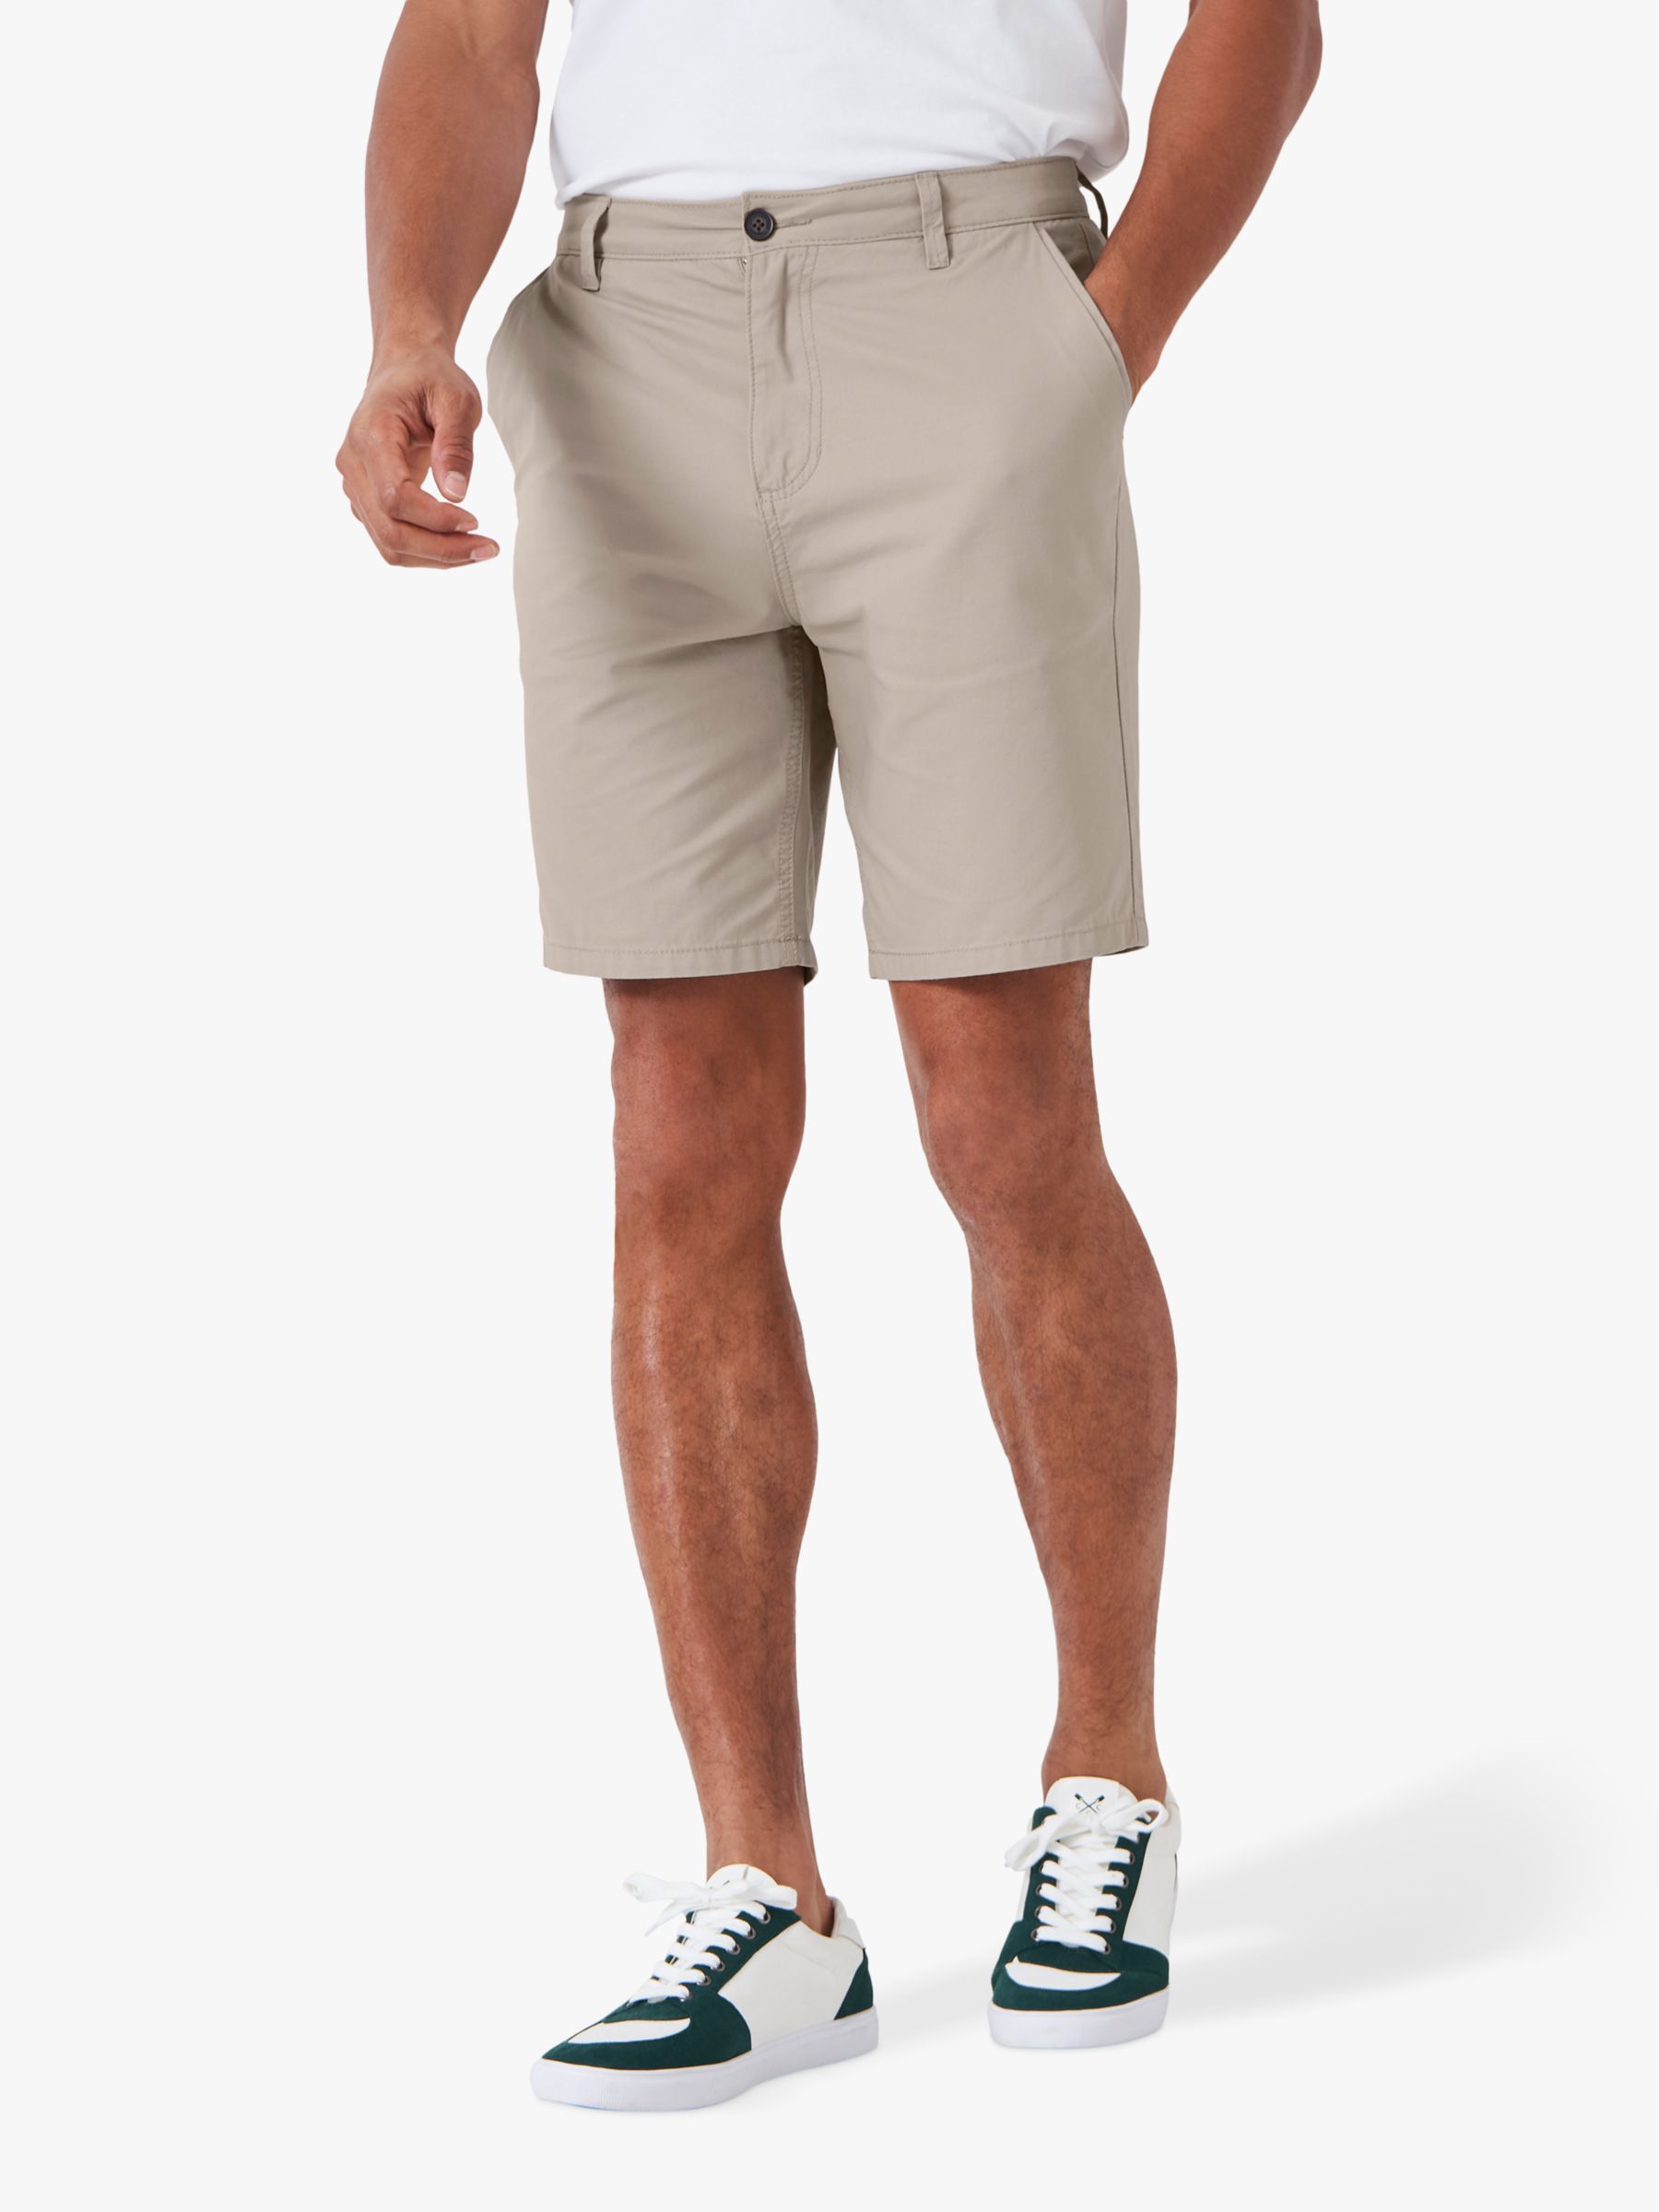 130 Best Men's Chino Short Outfits ideas  chino shorts outfit, short  outfits, men casual